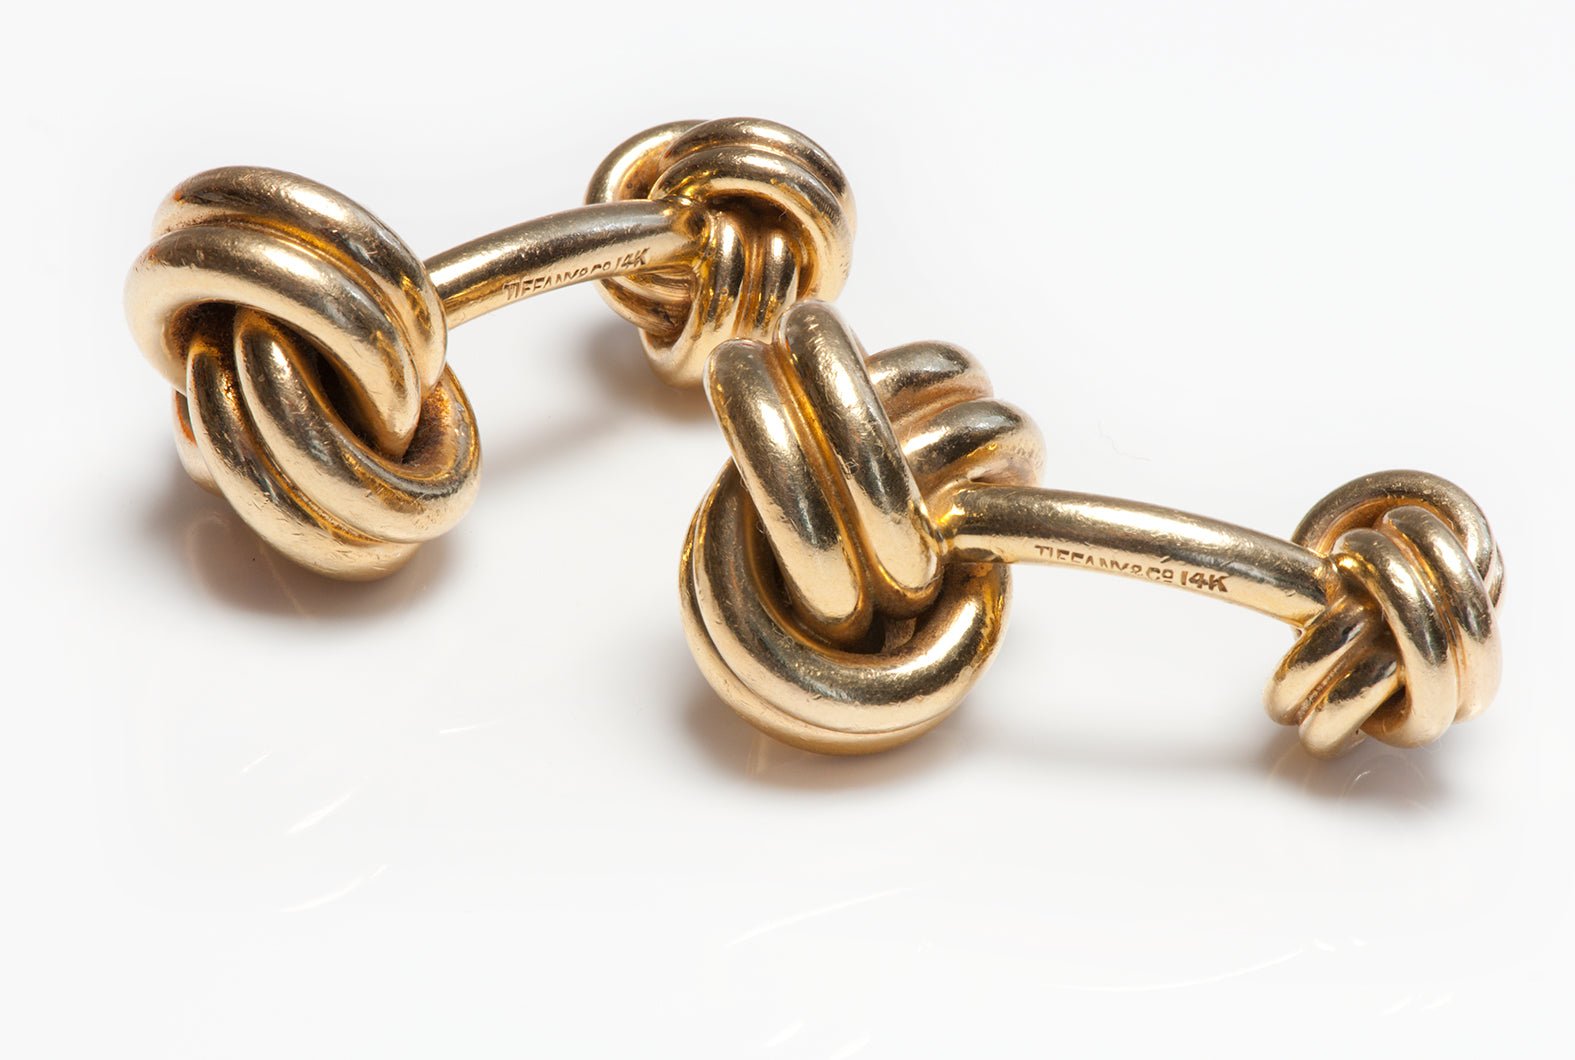 Vintage Tiffany & Co. Large Gold Knot Cufflinks